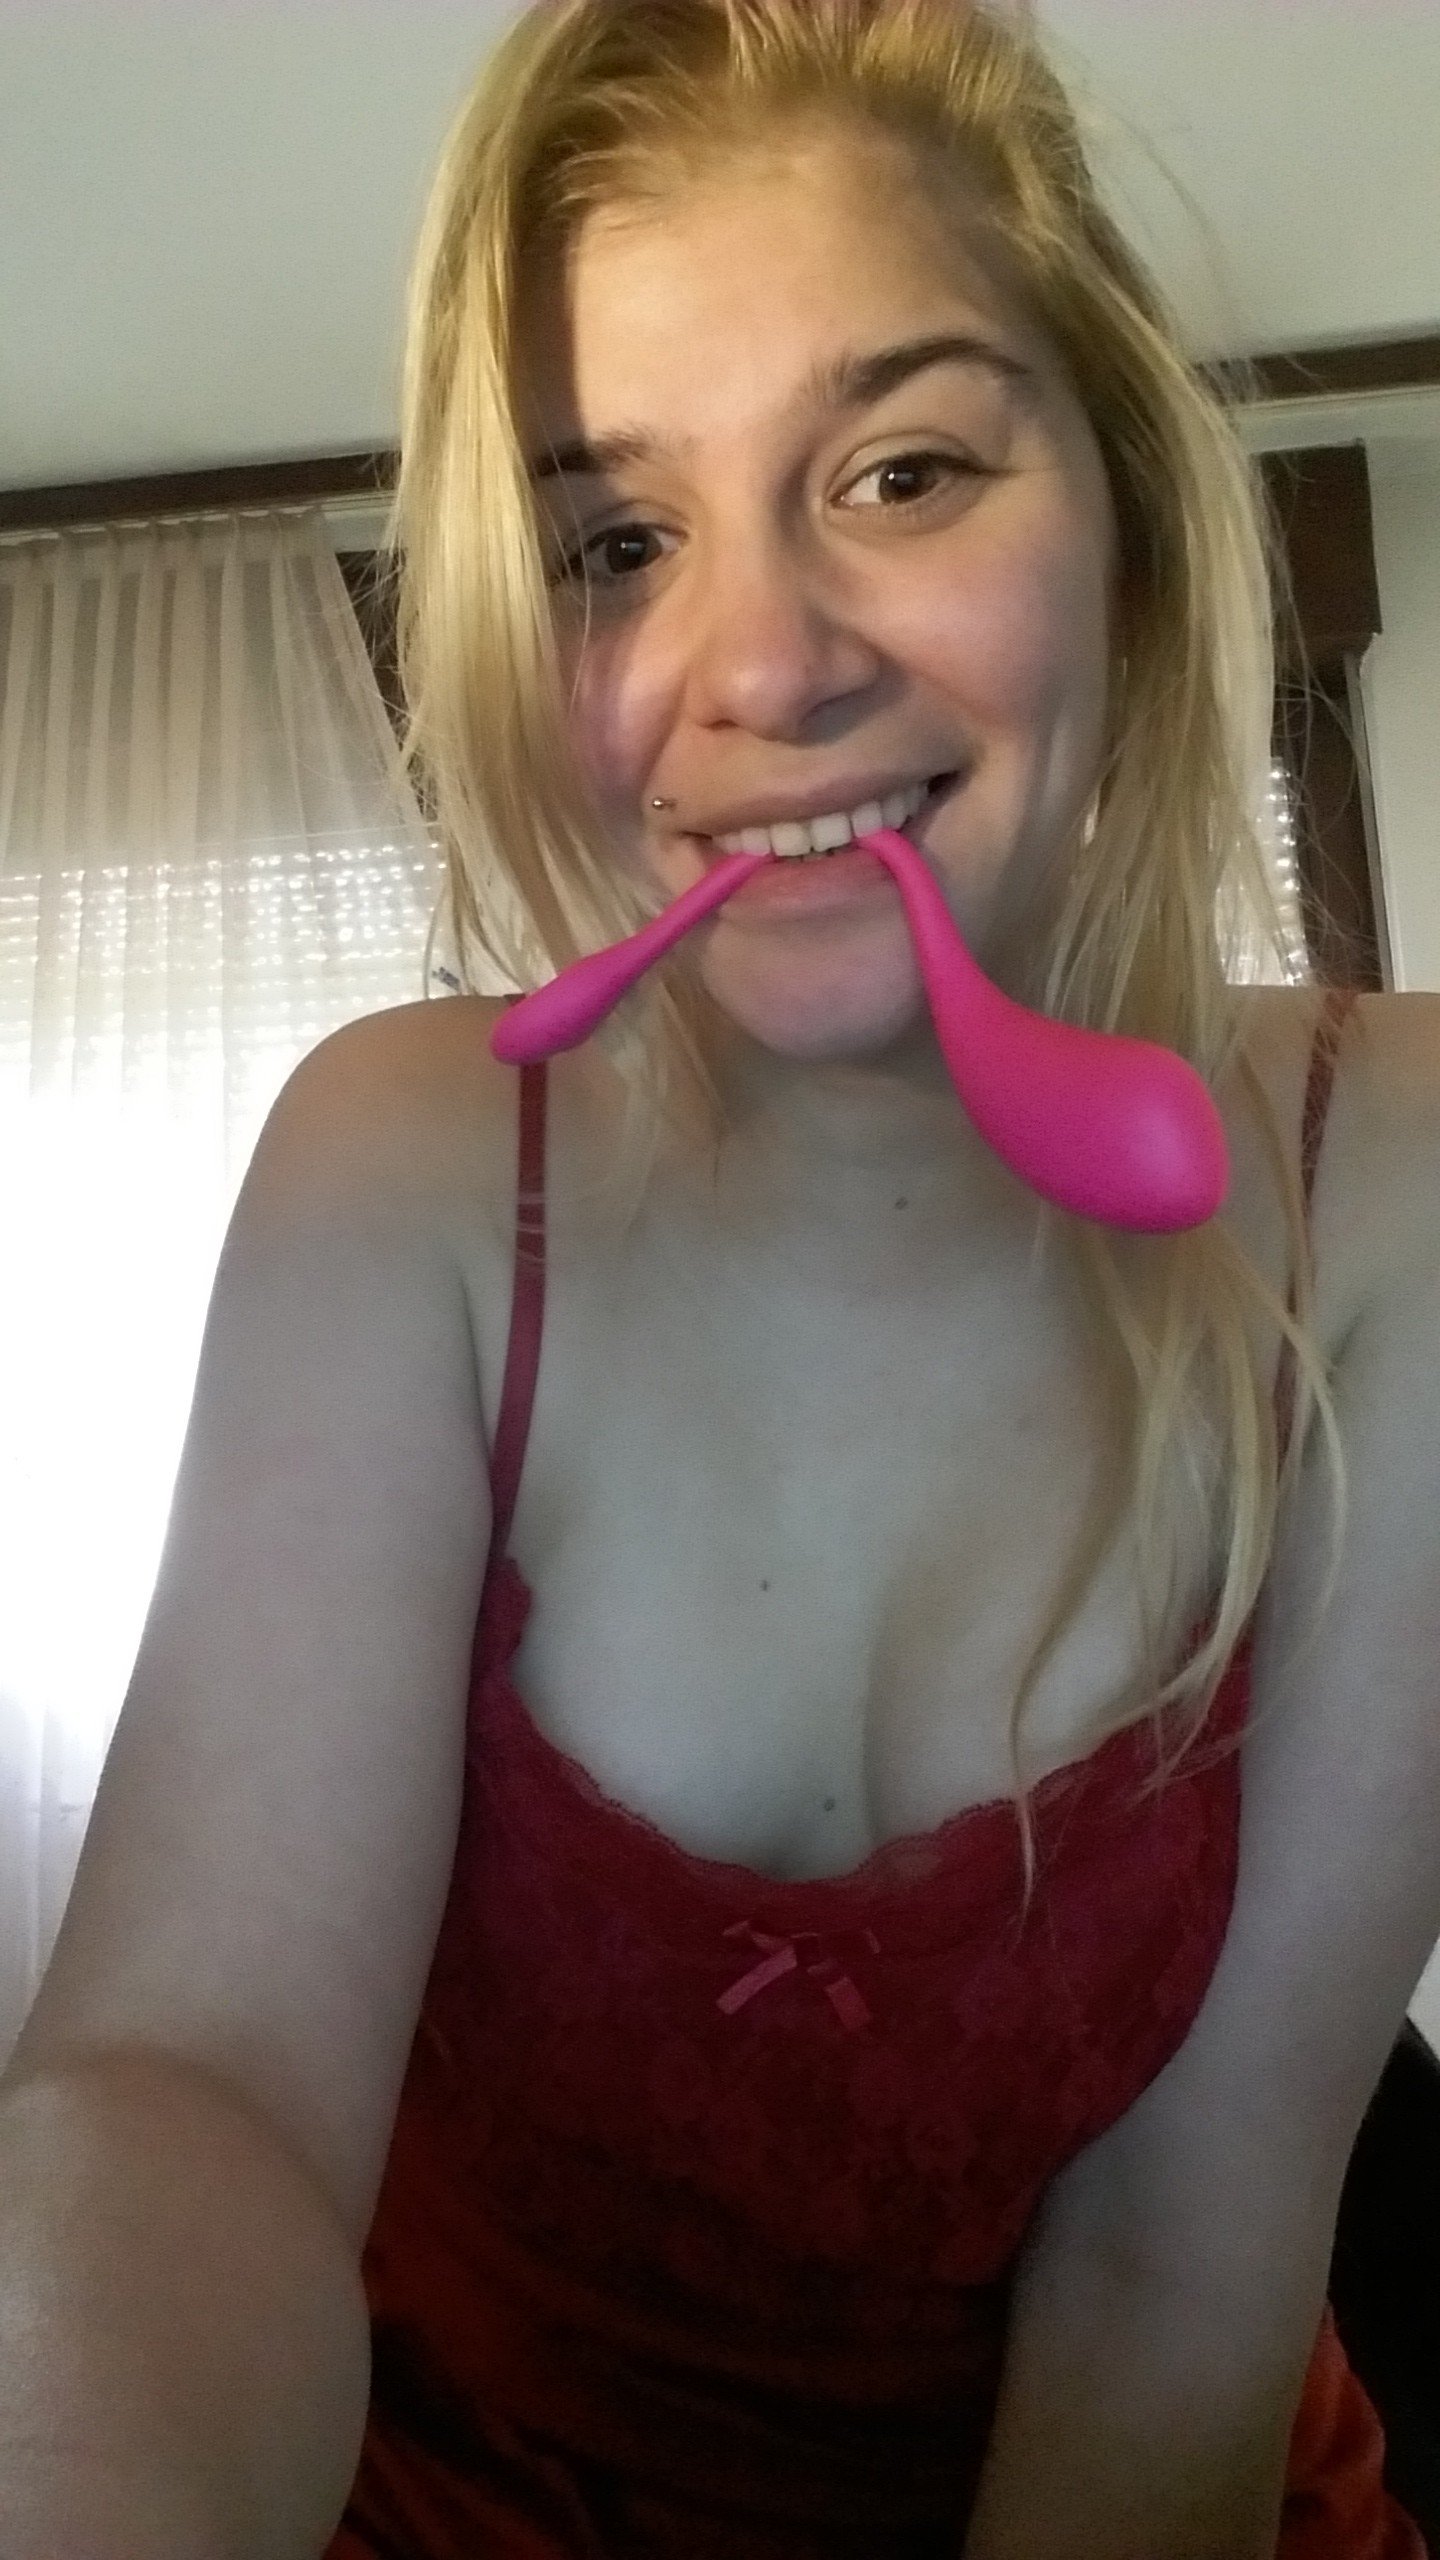 Photo by Mia with the username @nocages, who is a star user,  December 17, 2020 at 3:49 PM. The post is about the topic Adorable and the text says 'I would say I am adorable, but you?
Waiting you to play with me.. https://chaturbate.com/in/?track=default&tour=dT8X&campaign=8QxWf&room=miadanes369'